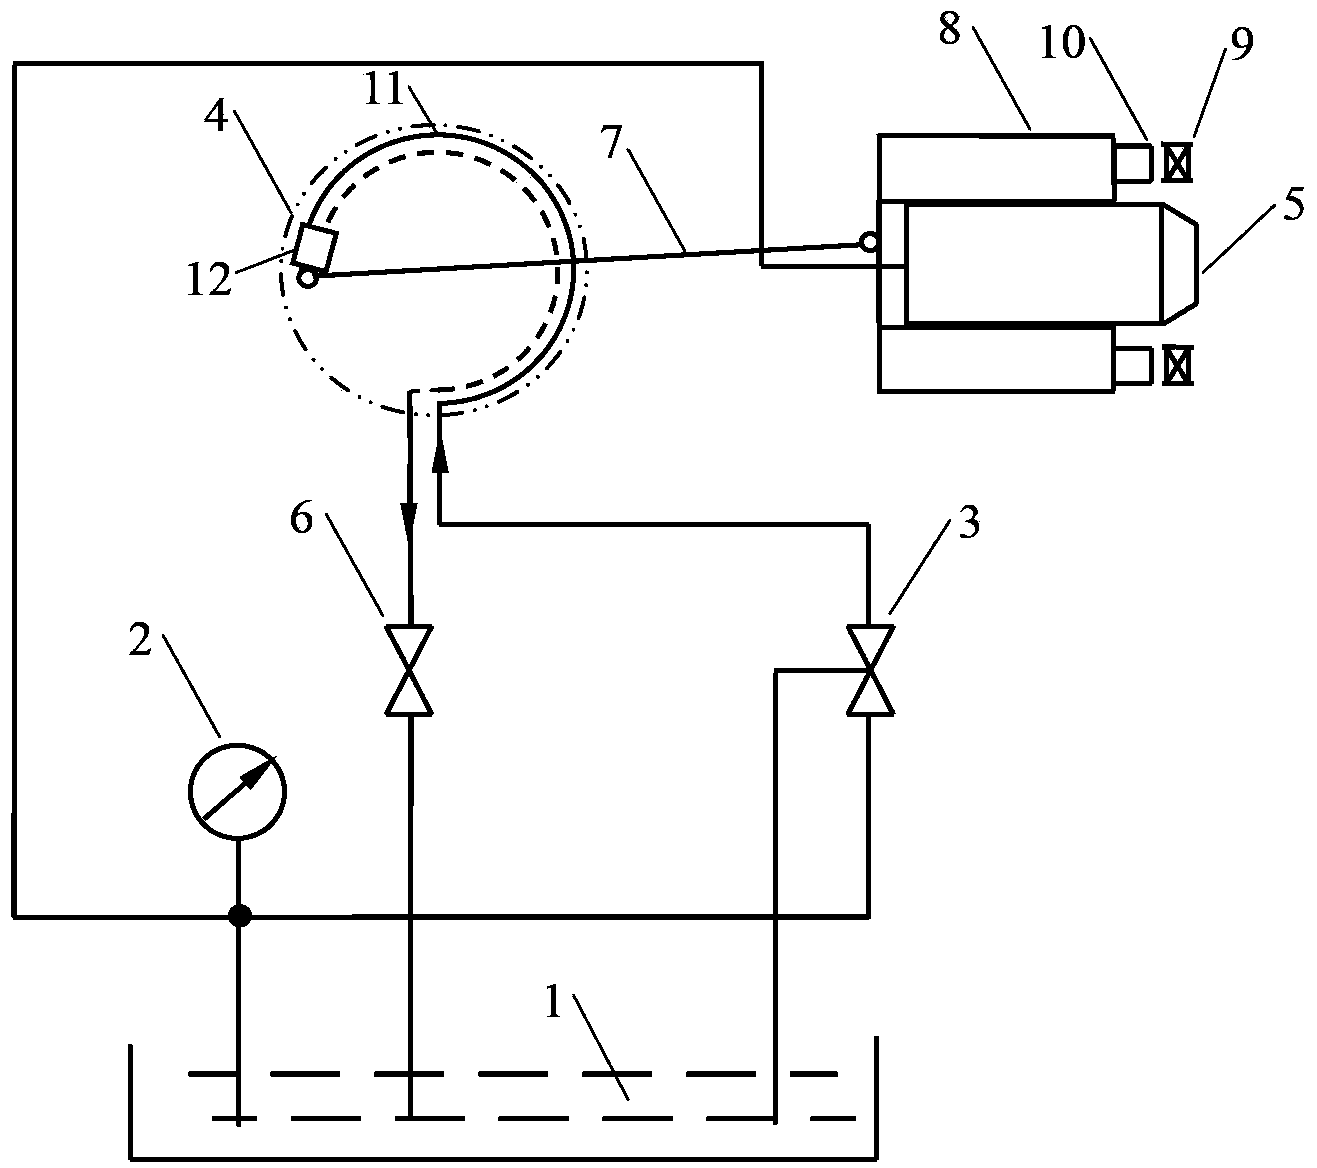 Active control mechanism for broadening lean burn flameout boundary of combustion chamber of heavy duty gas turbine